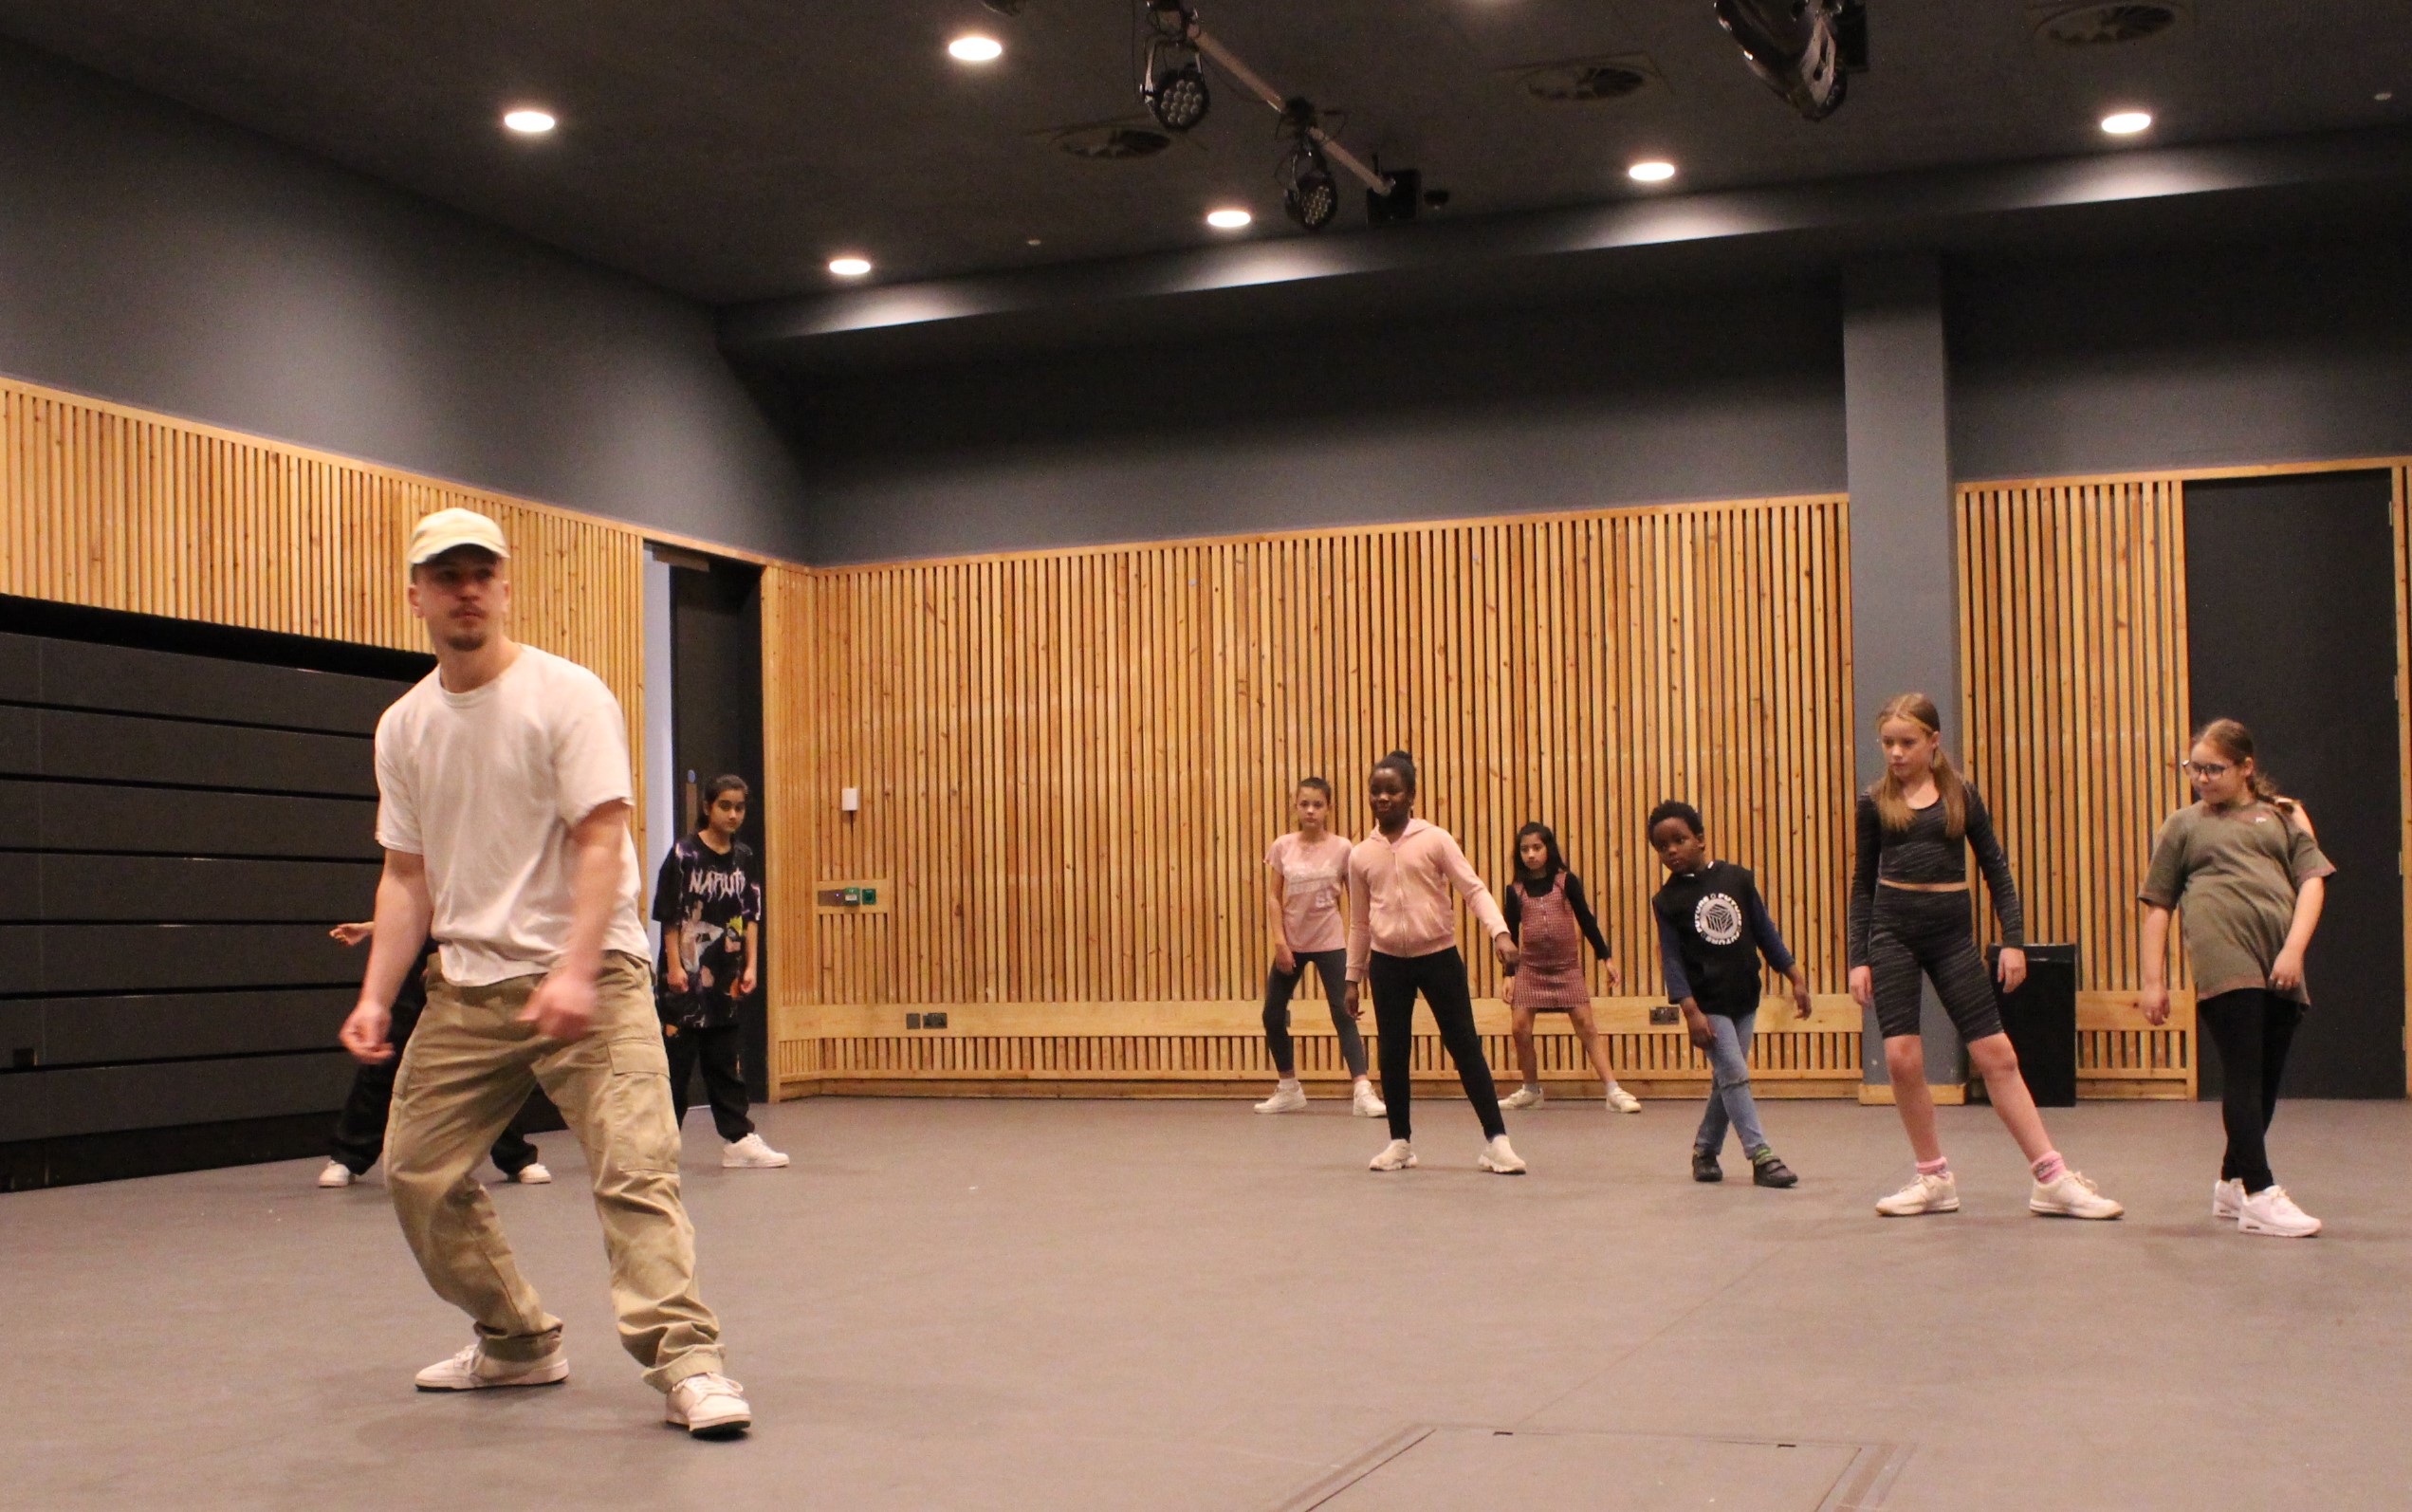 Tom Hughes Lloyd leading a group of young people in a street dance session.